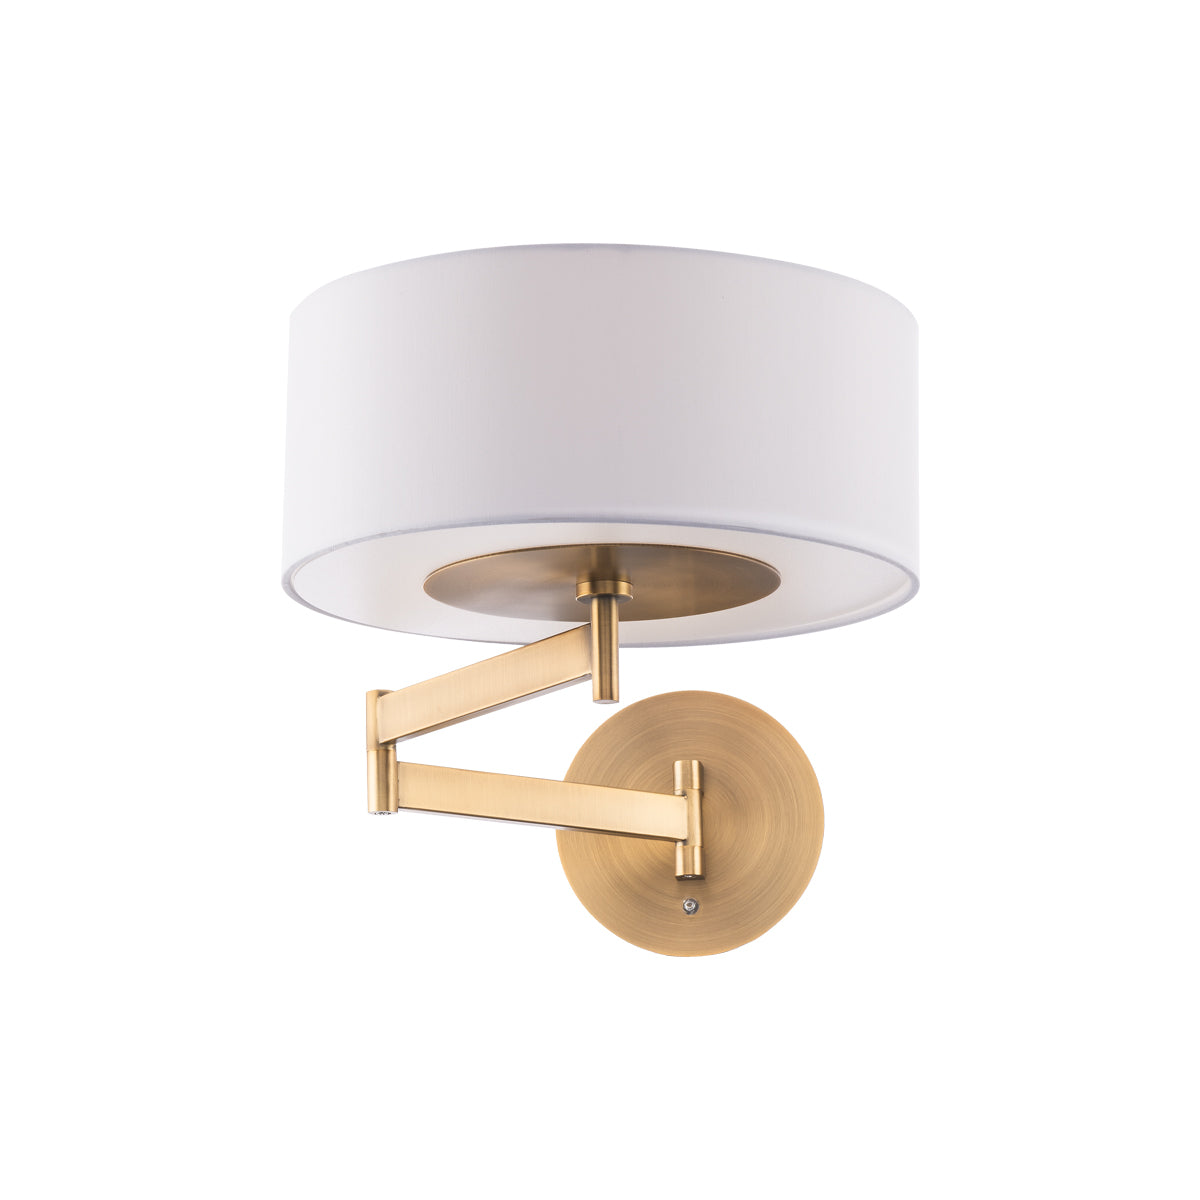 W.A.C. Canada - LED Swing Arm Wall Lamp - Chelsea - Aged Brass- Union Lighting Luminaires Decor